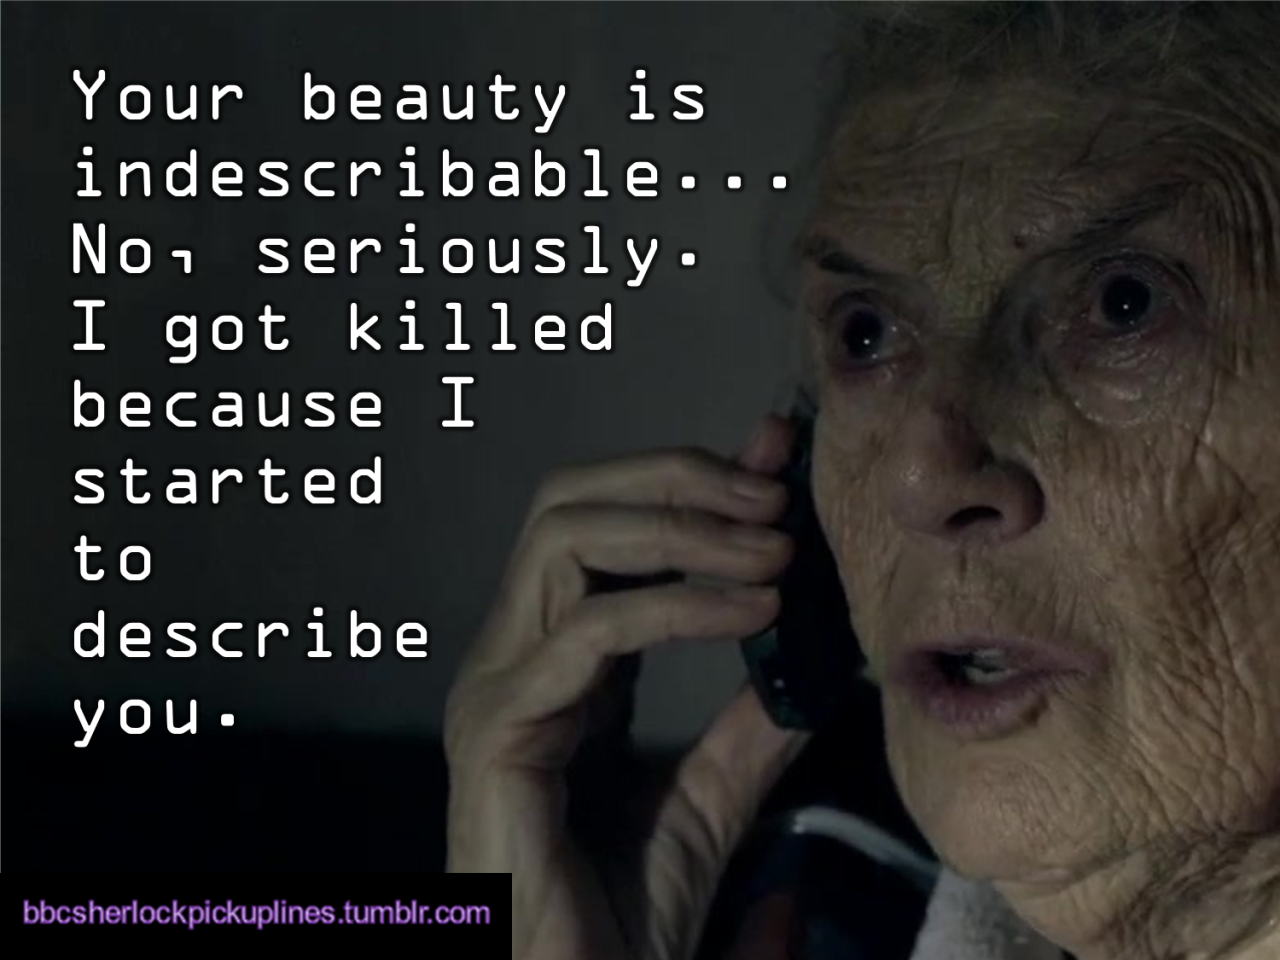 â€œYour beauty is indescribable&hellip; No, seriously. I got killed because